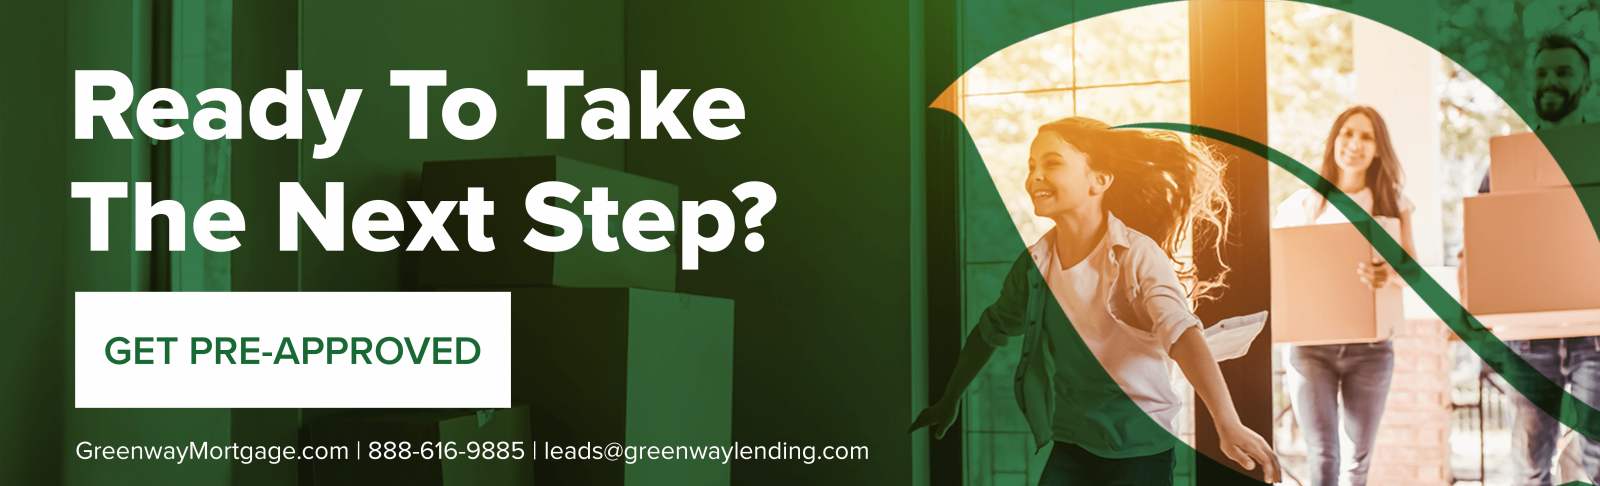 Get Pre-Approved Today with Greenway Mortgage